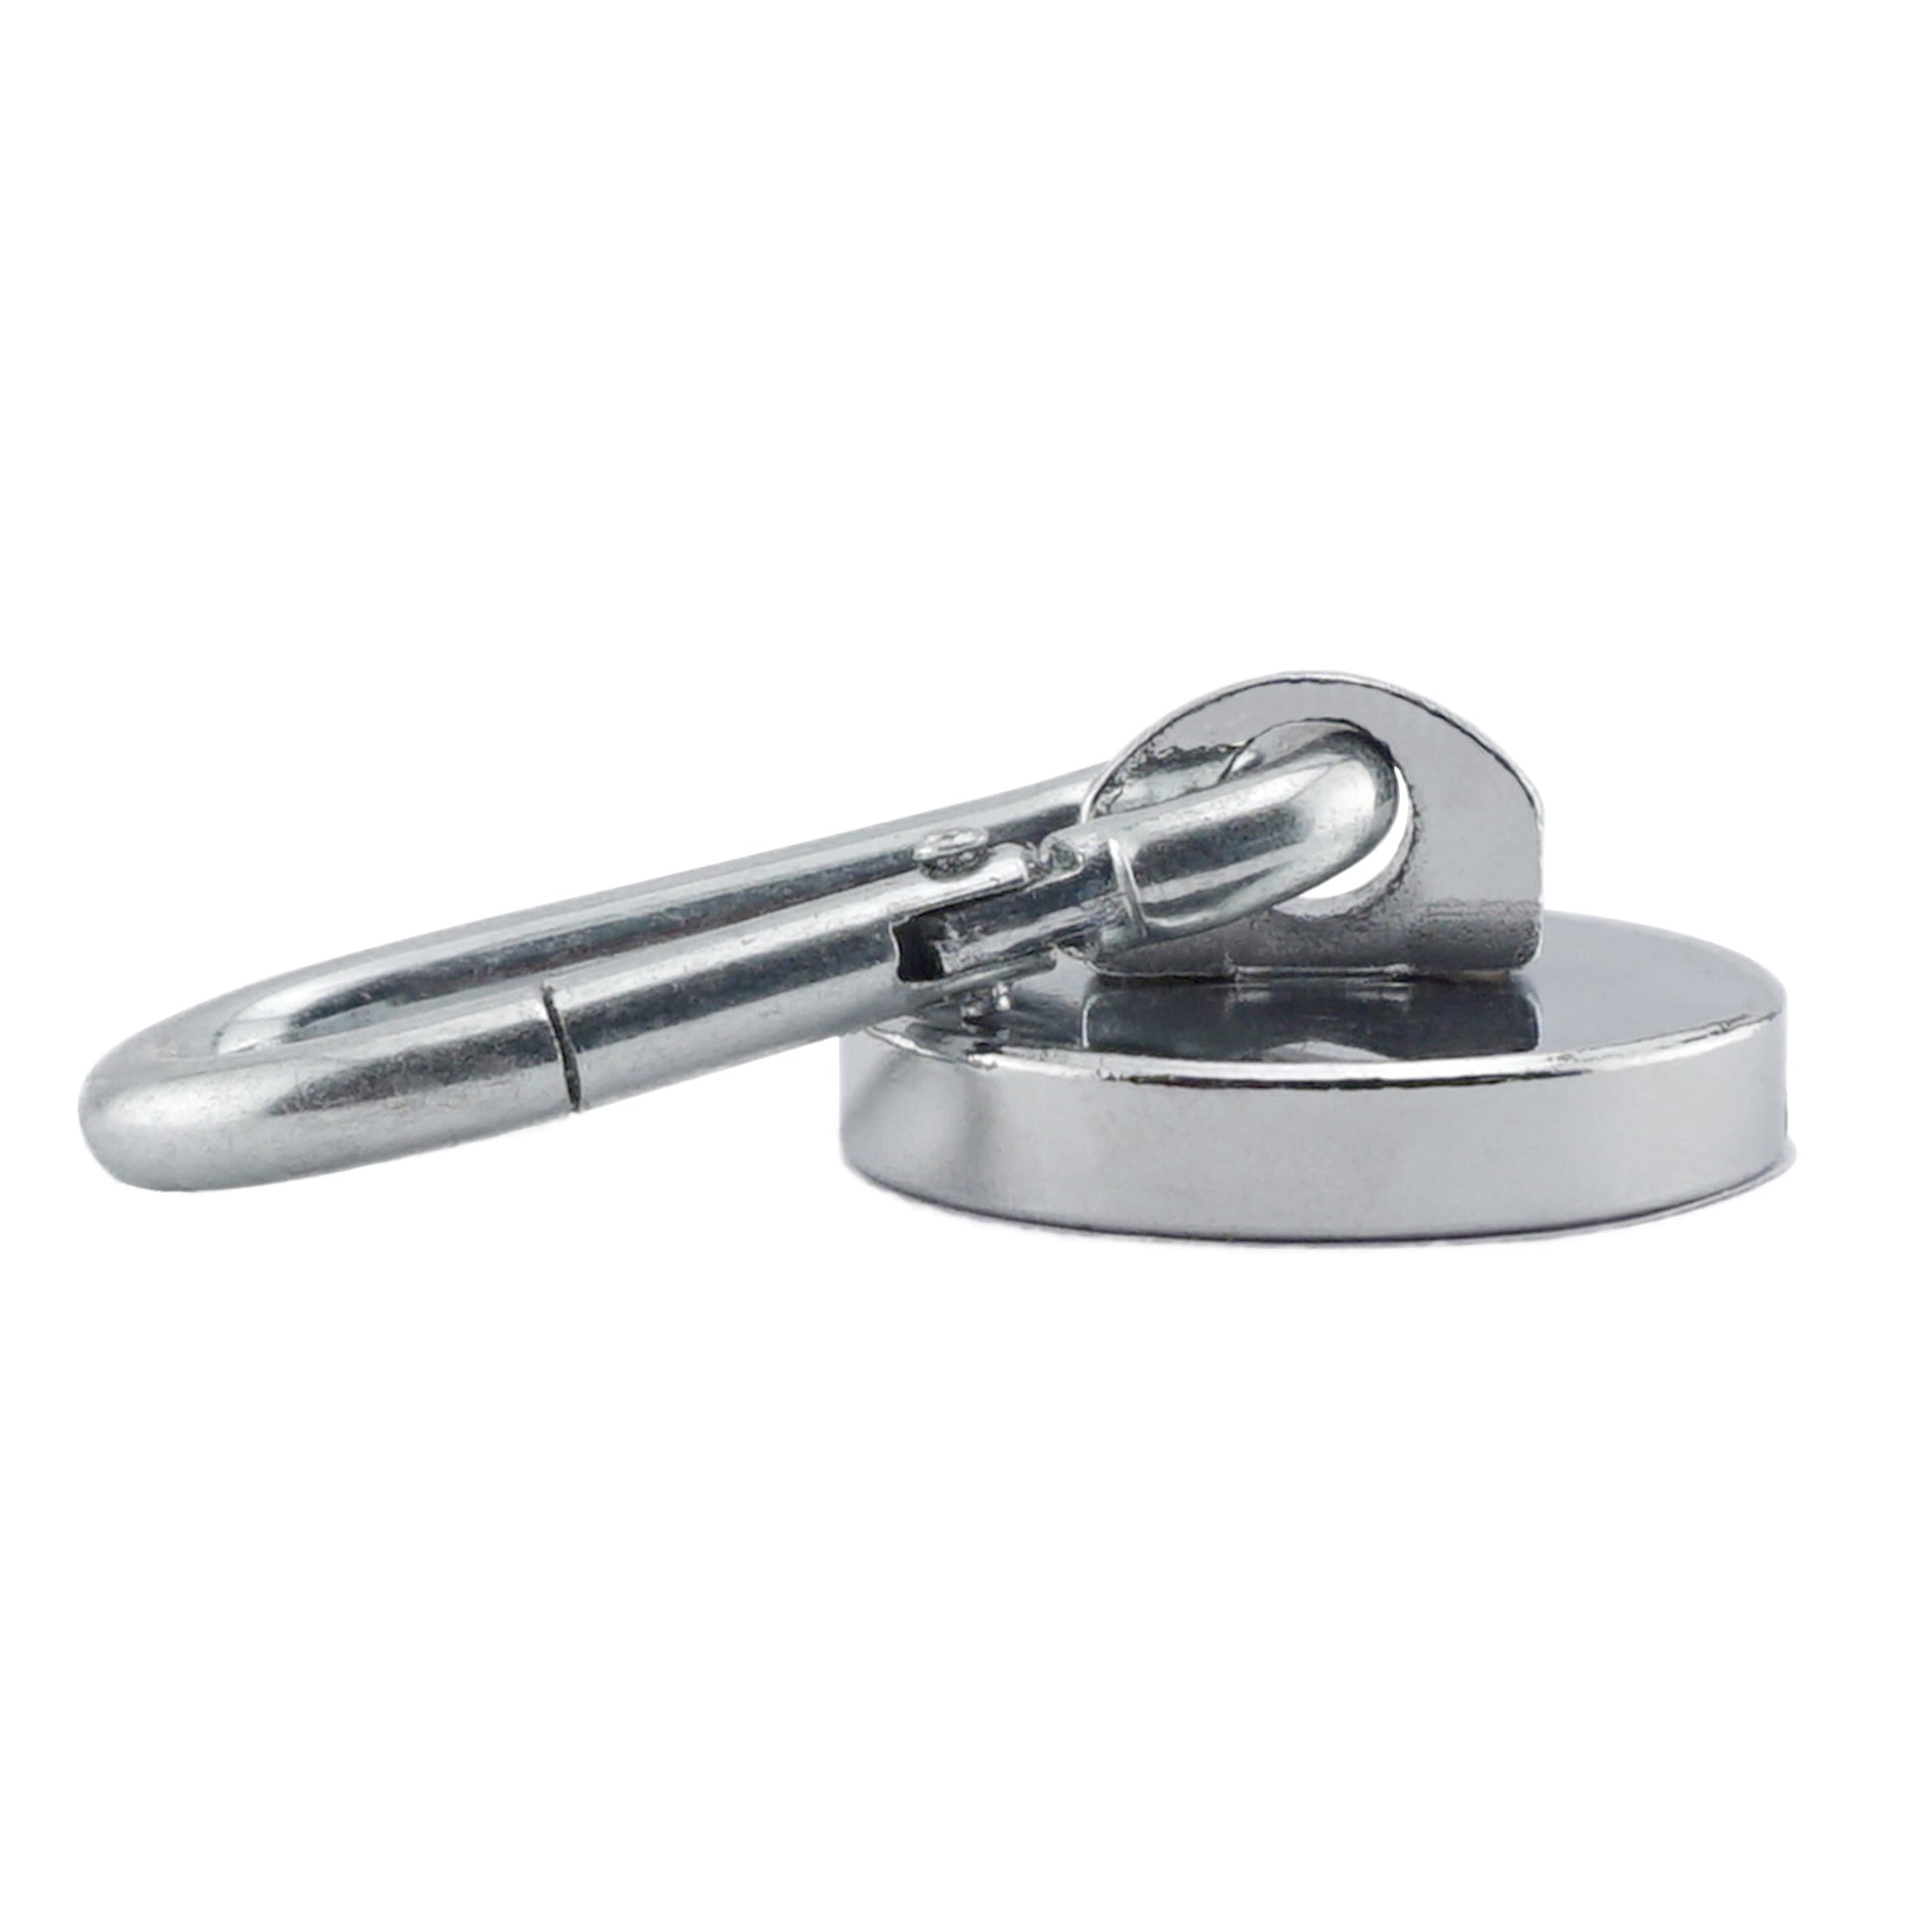 Load image into Gallery viewer, 07587 Neodymium Magnetic Carabiner Hook - Side View